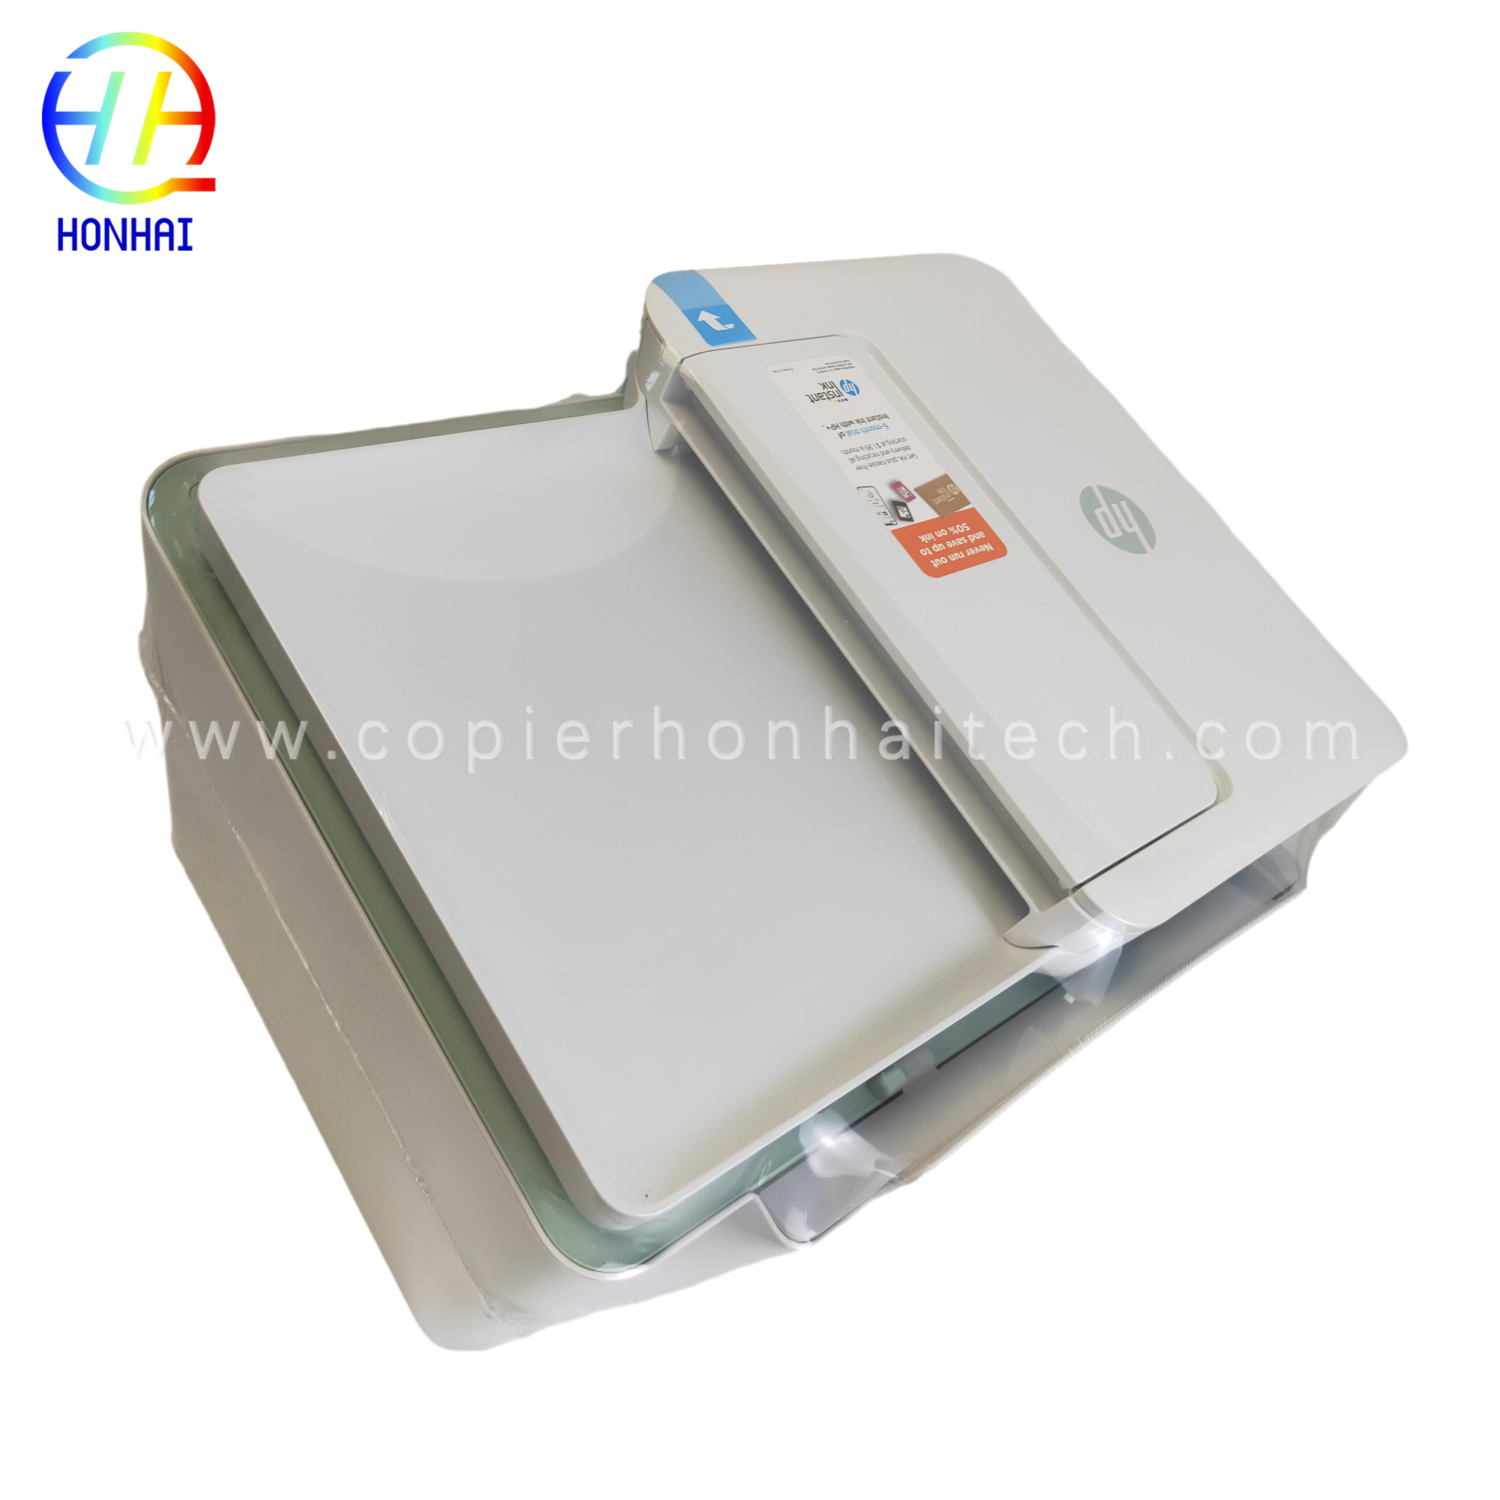 https://www.copierhonhaitech.com/original-new-wireless-printer-for-hp-deskjet-4122e-all-in-one-printer-scan-and-copy-home-office-students-and-home- printer-26q96a-product/